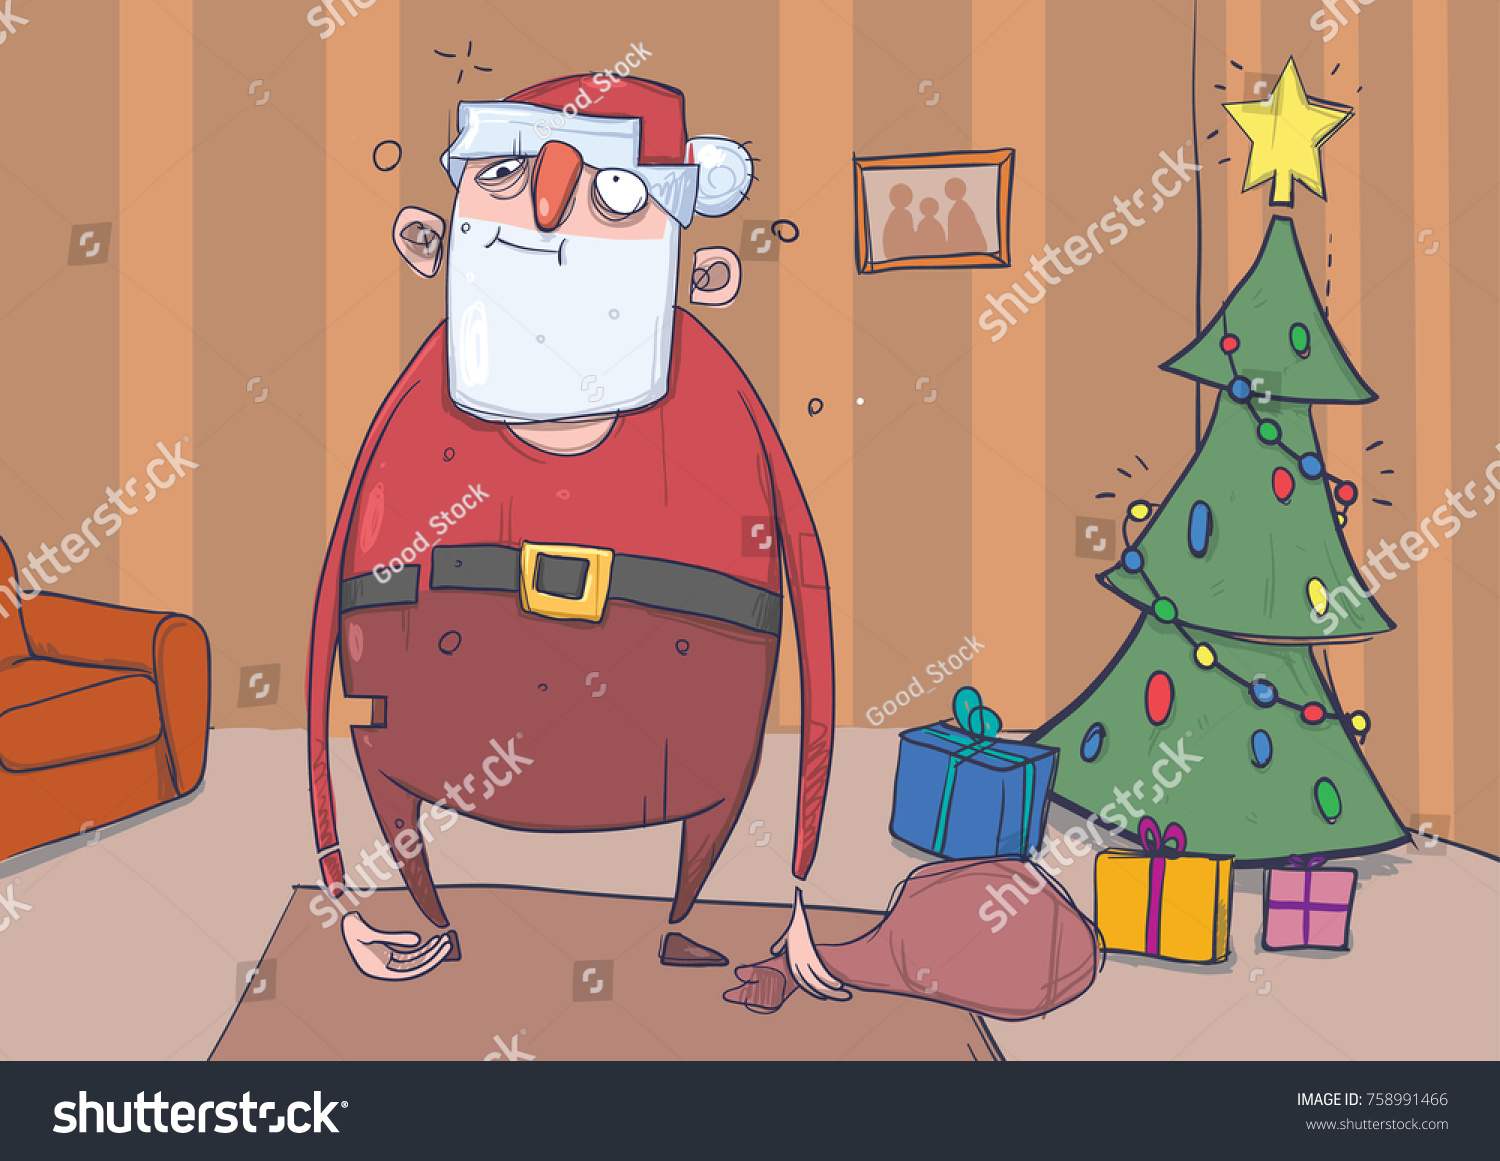 Funny drunk Santa Claus with a bag stands in a room with decoreted Christmas tree and